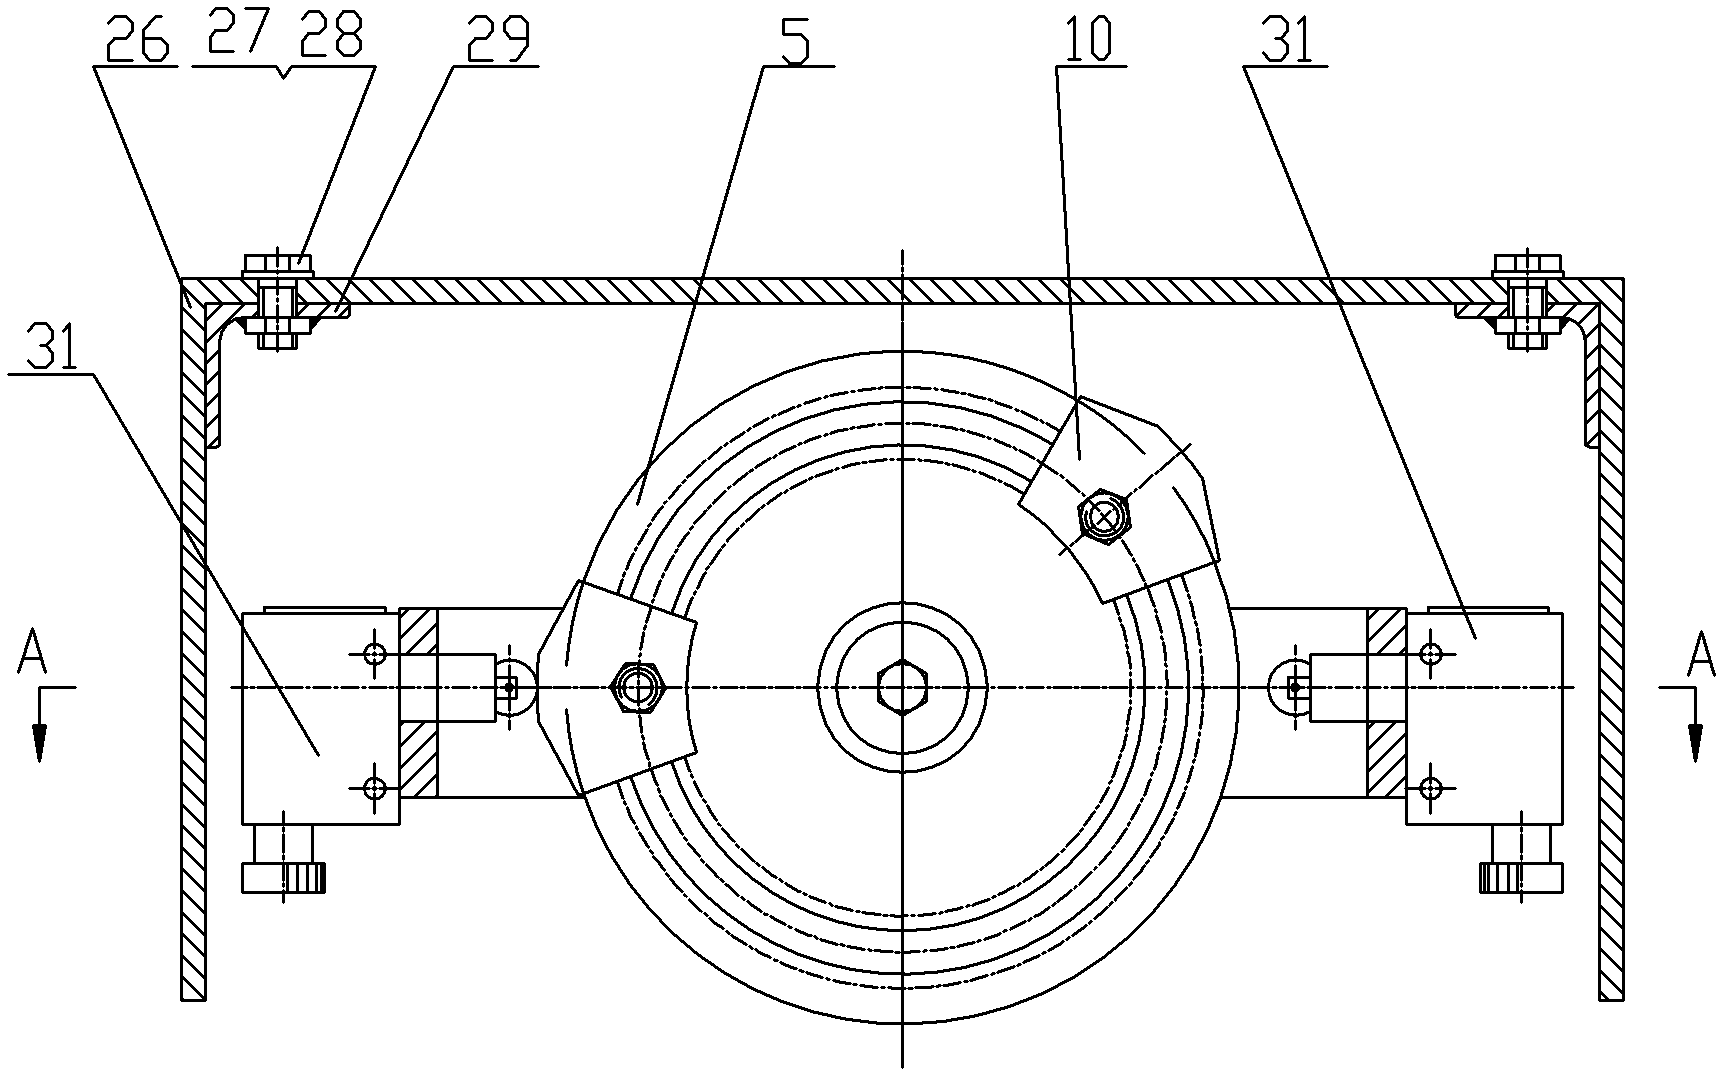 Elevation travel switch limiting device